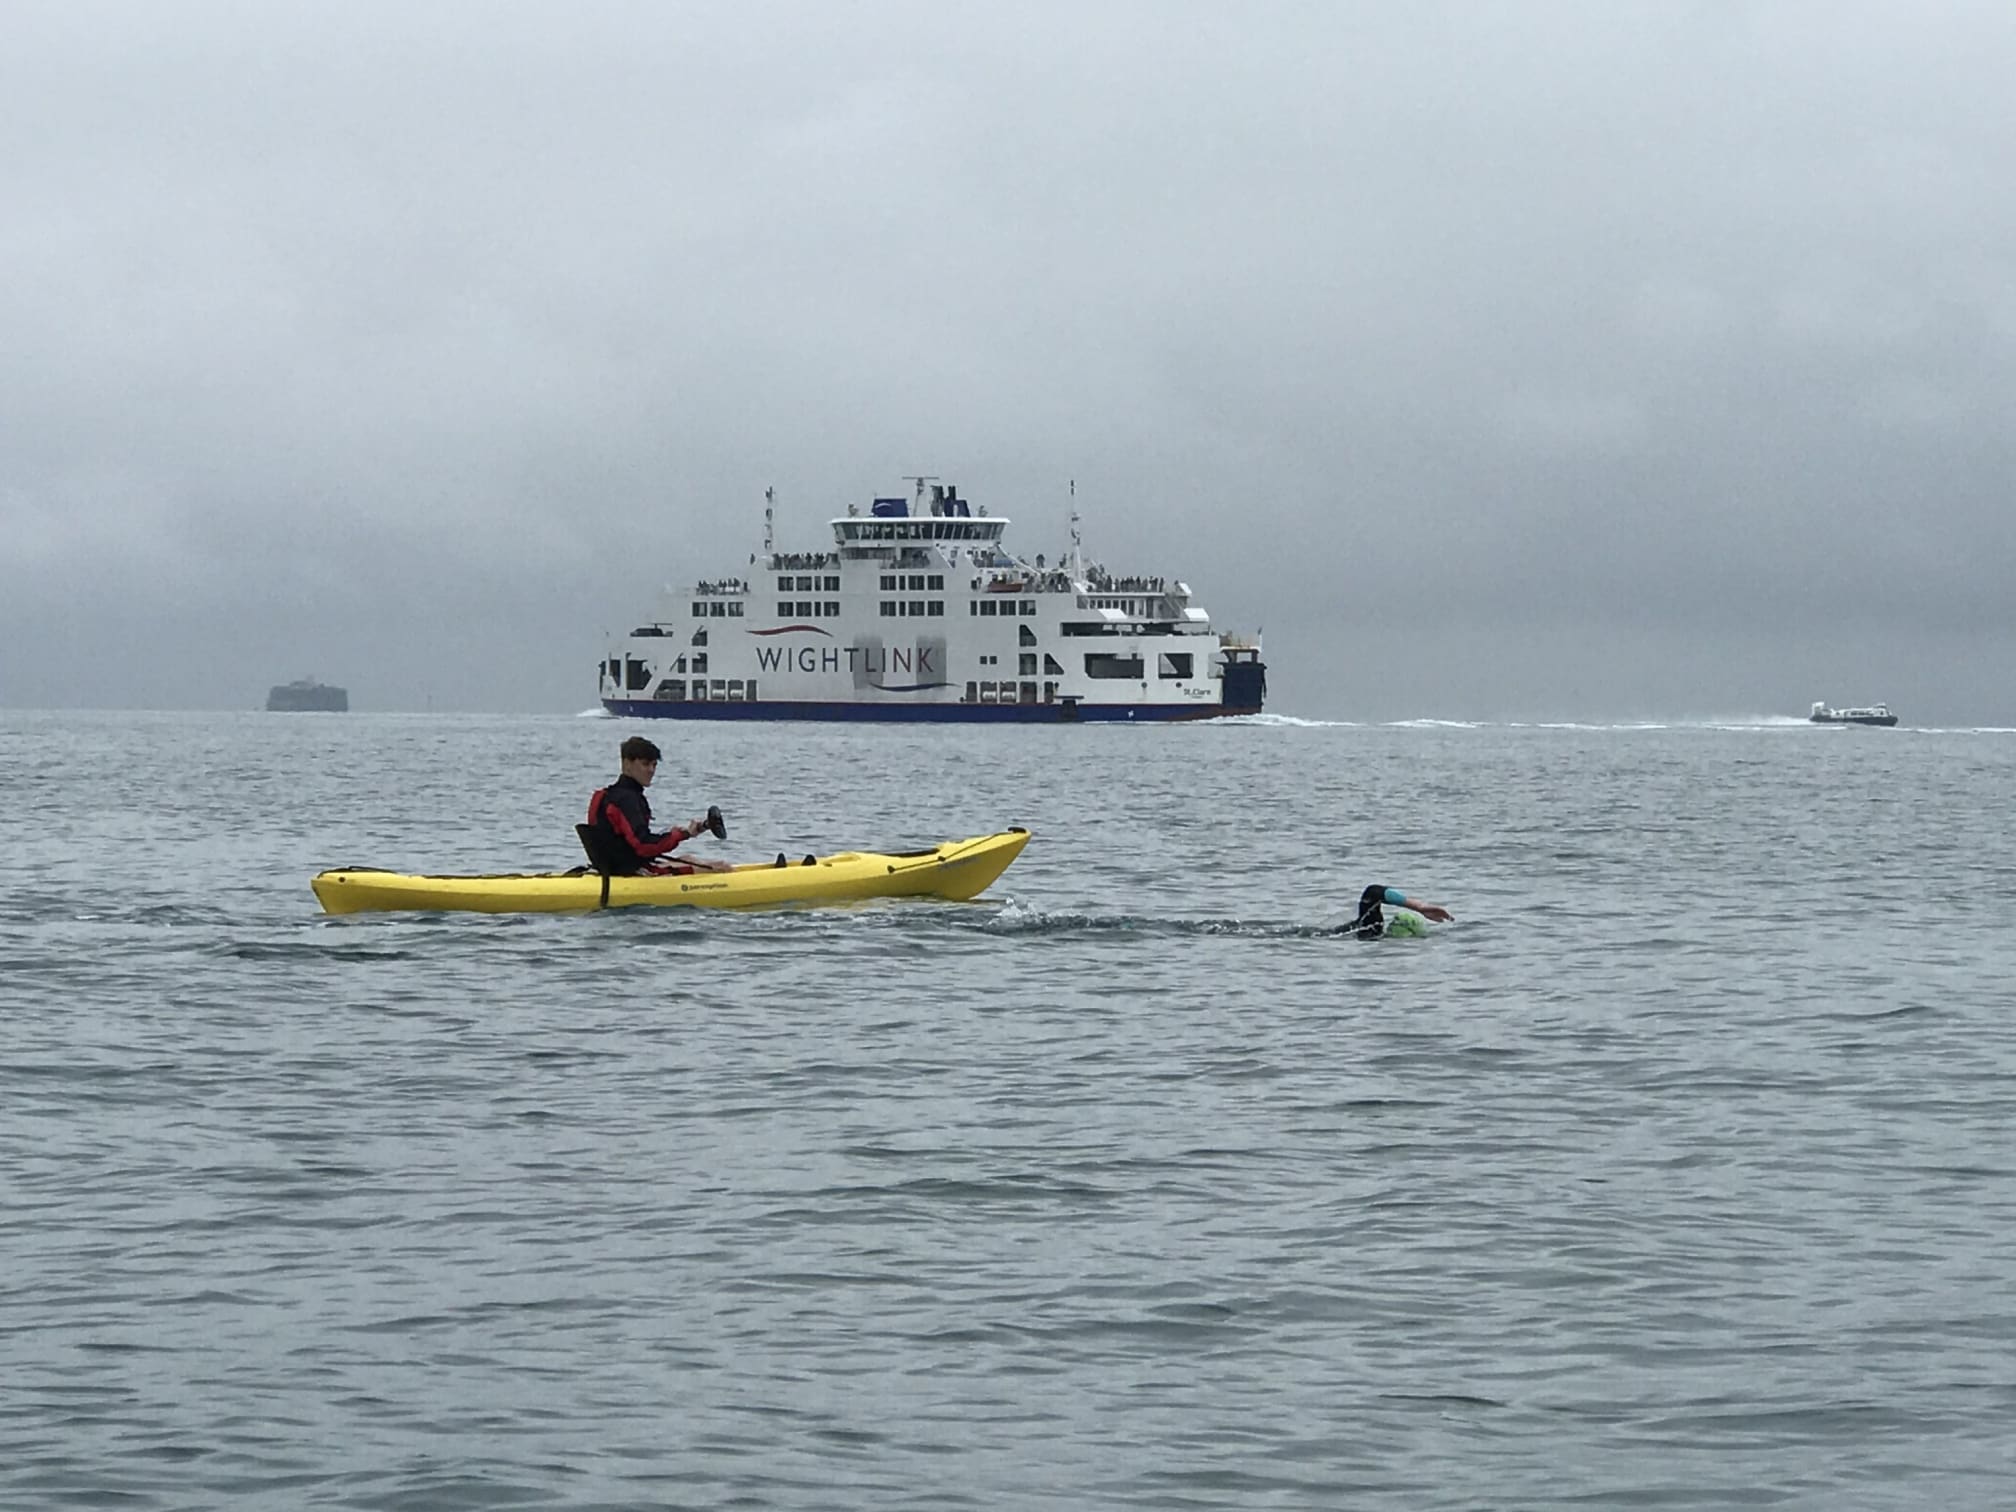 Kayaker and swimmer in front of the Isle of Wight ferry